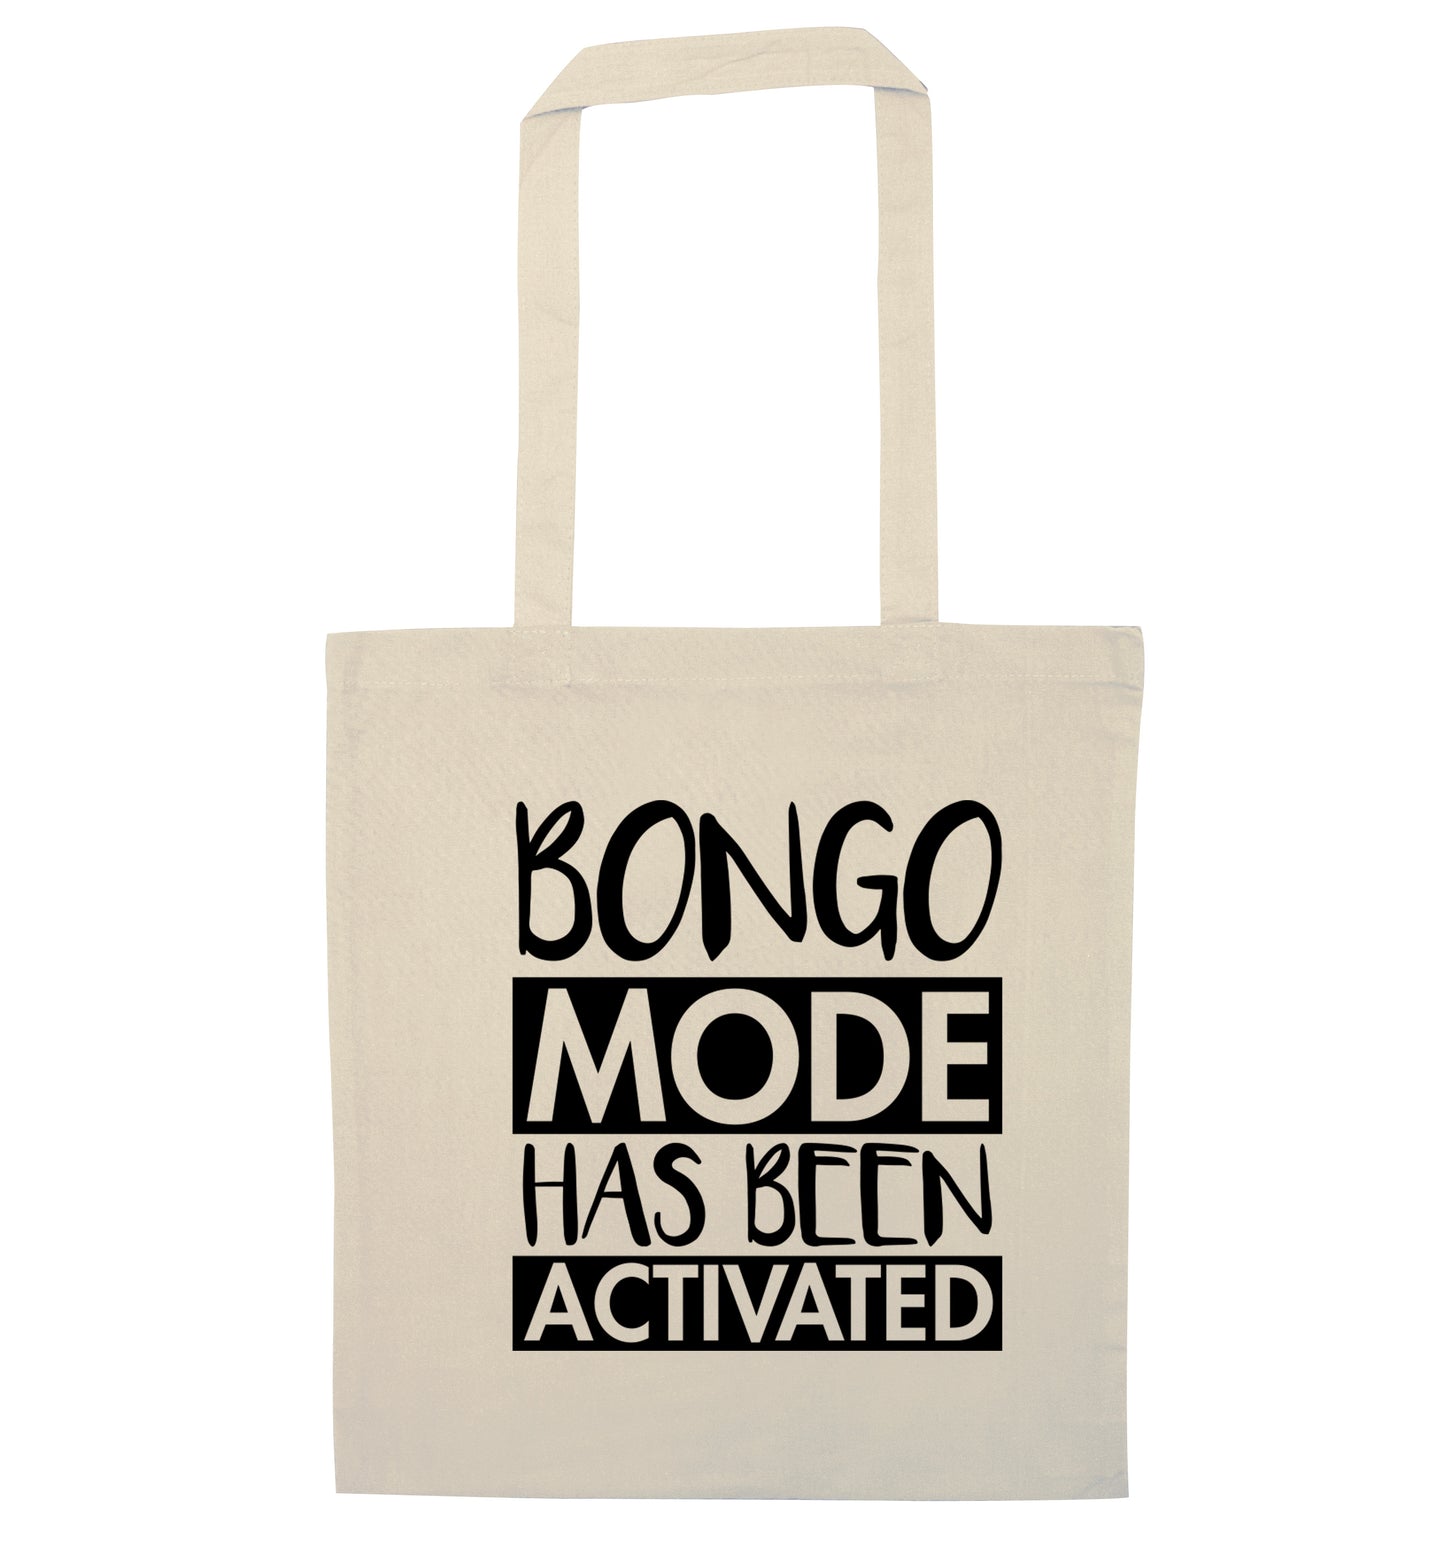 Bongo mode has been activated natural tote bag